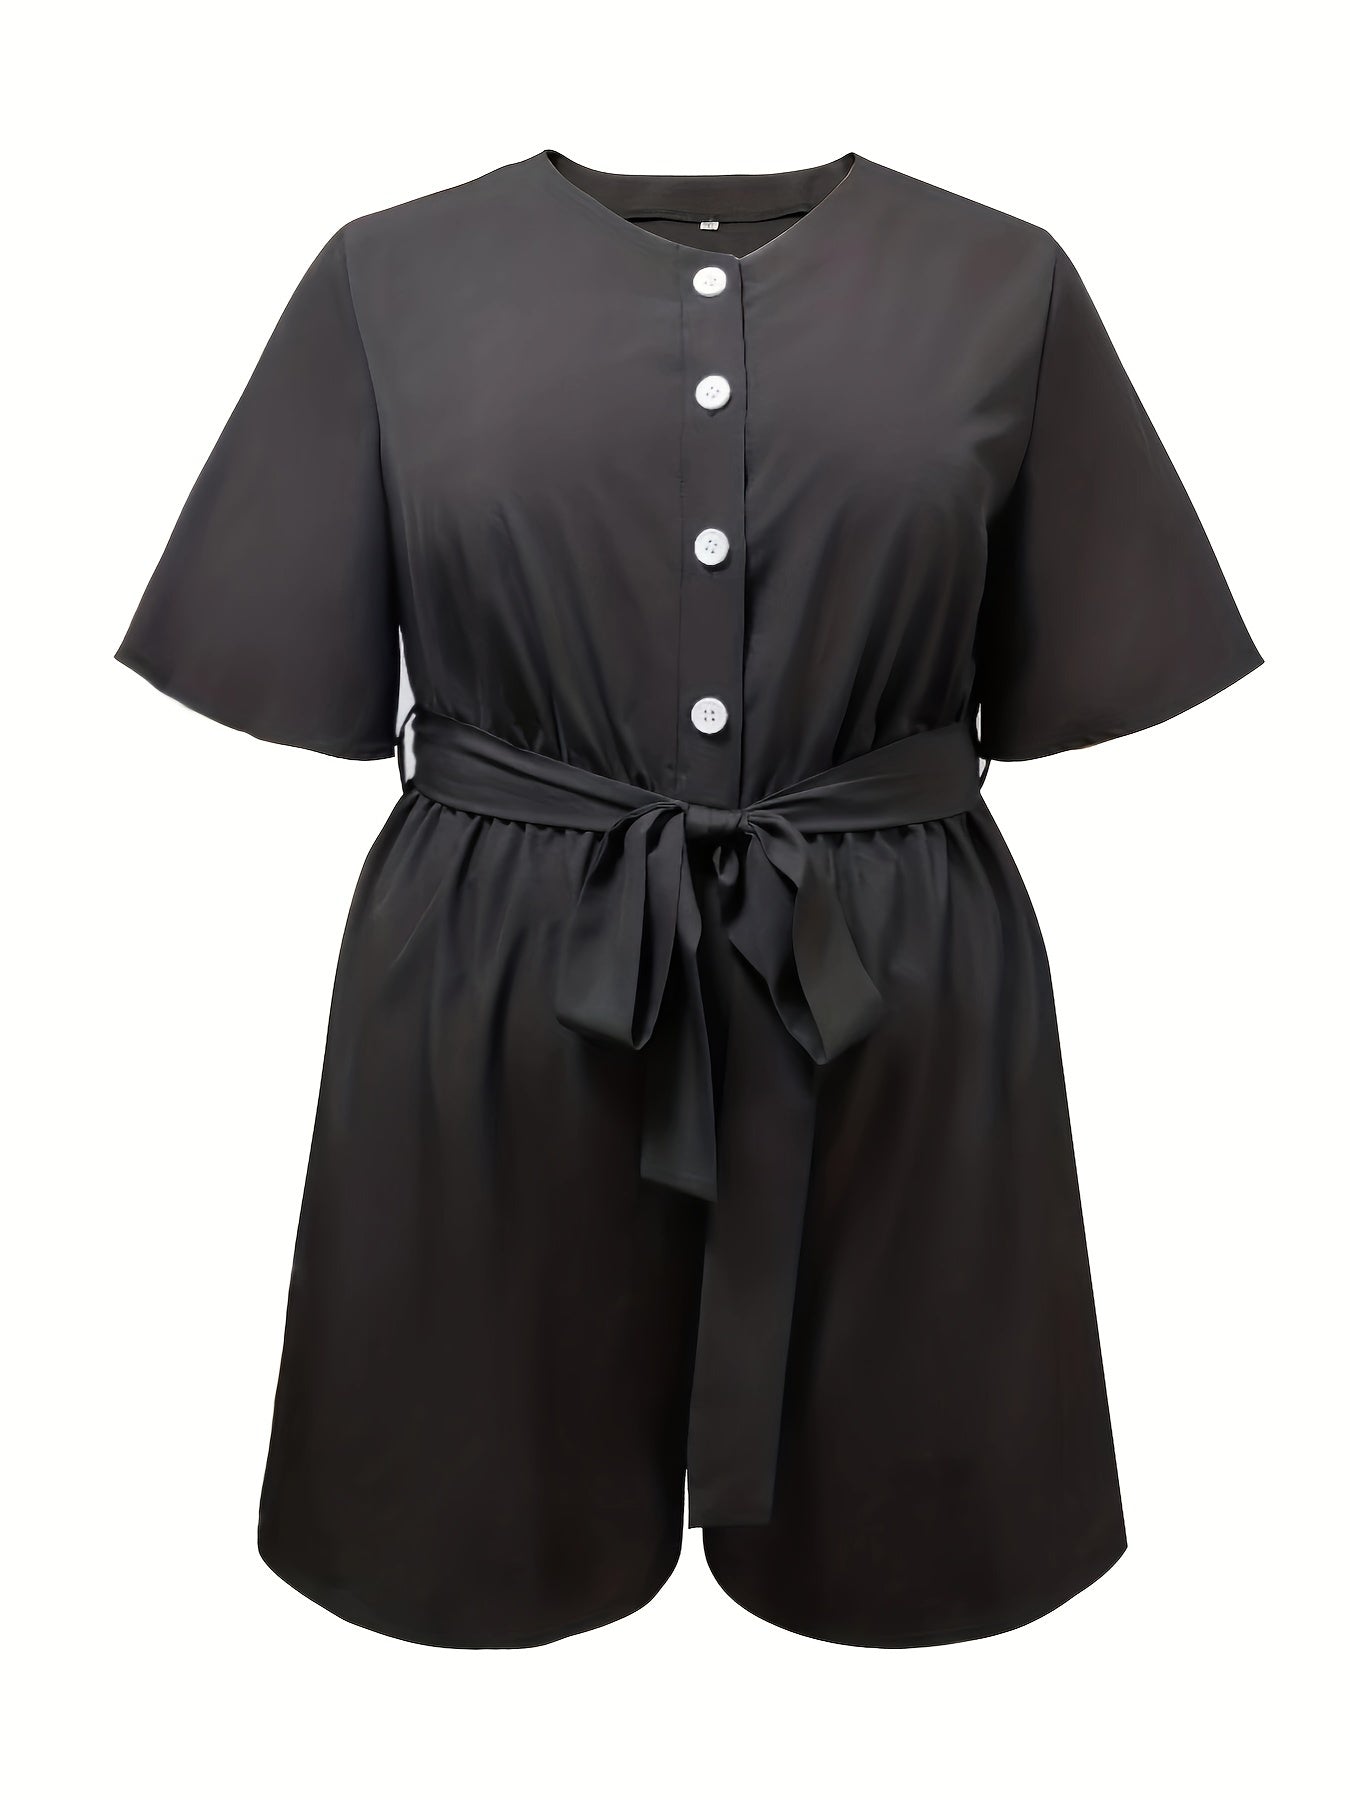 Plus Size Casual Romper, Women's Plus Solid Button Up Short Sleeve V Neck Romper With Pockets & Belt